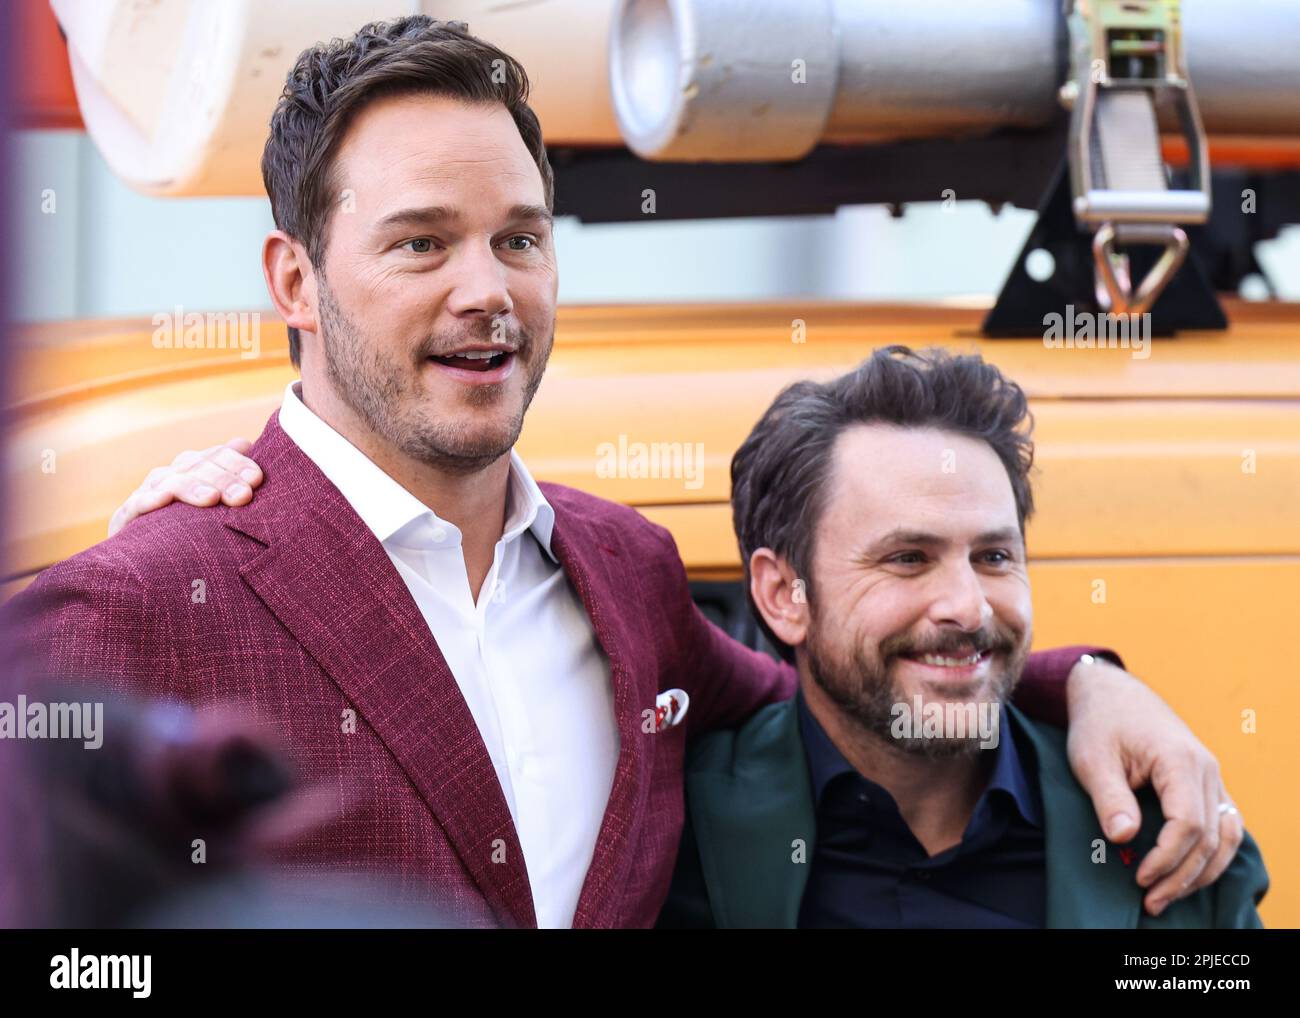 LOS ANGELES, CALIFORNIA, USA - APRIL 01: Chris Pratt and Charlie Day arrive at the Los Angeles Special Screening Of Universal Pictures, Nintendo And Illumination Entertainment's 'The Super Mario Bros. Movie' held at the Regal Cinemas LA Live & 4DX Movie on April 1, 2023 in Los Angeles, California, United States. (Photo by Xavier Collin/Image Press Agency) Stock Photo